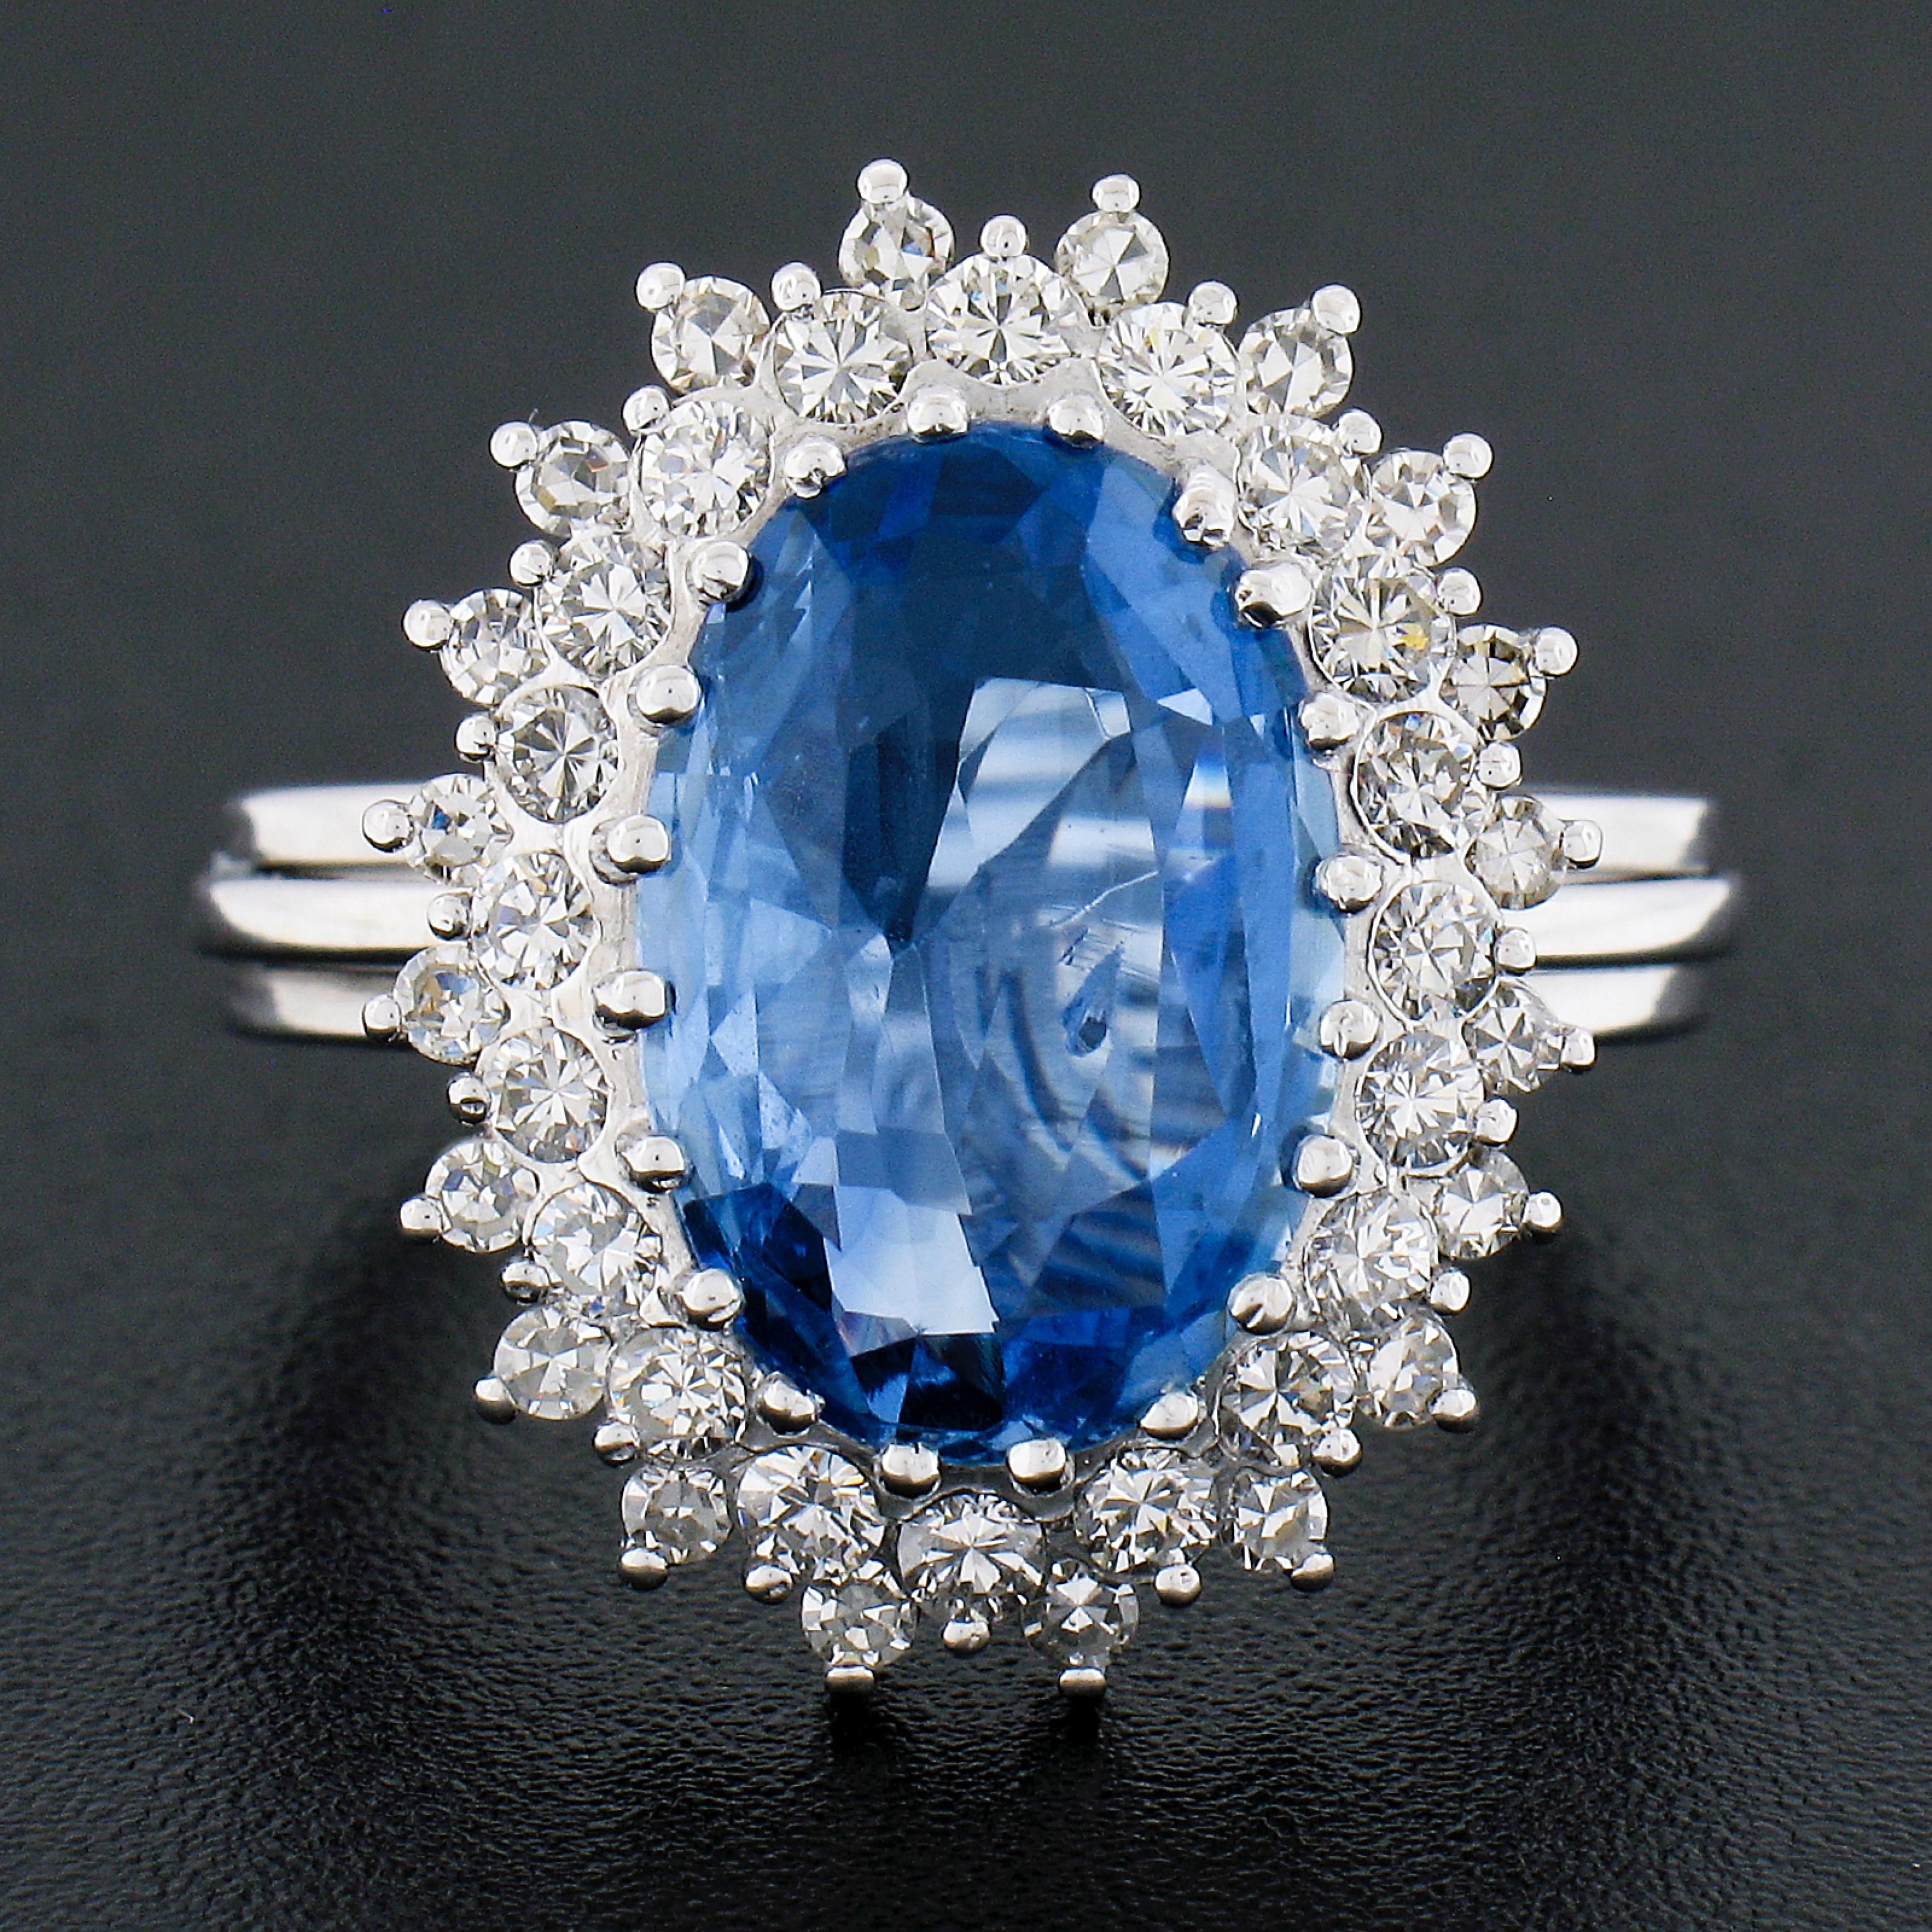 This jaw dropping vintage cocktail statement ring is crafted in solid 18k white gold and features a gorgeous, GIA certified, oval brilliant cut sapphire set at the center of a magnificent diamond dual halo. The large sapphire weighs approximately